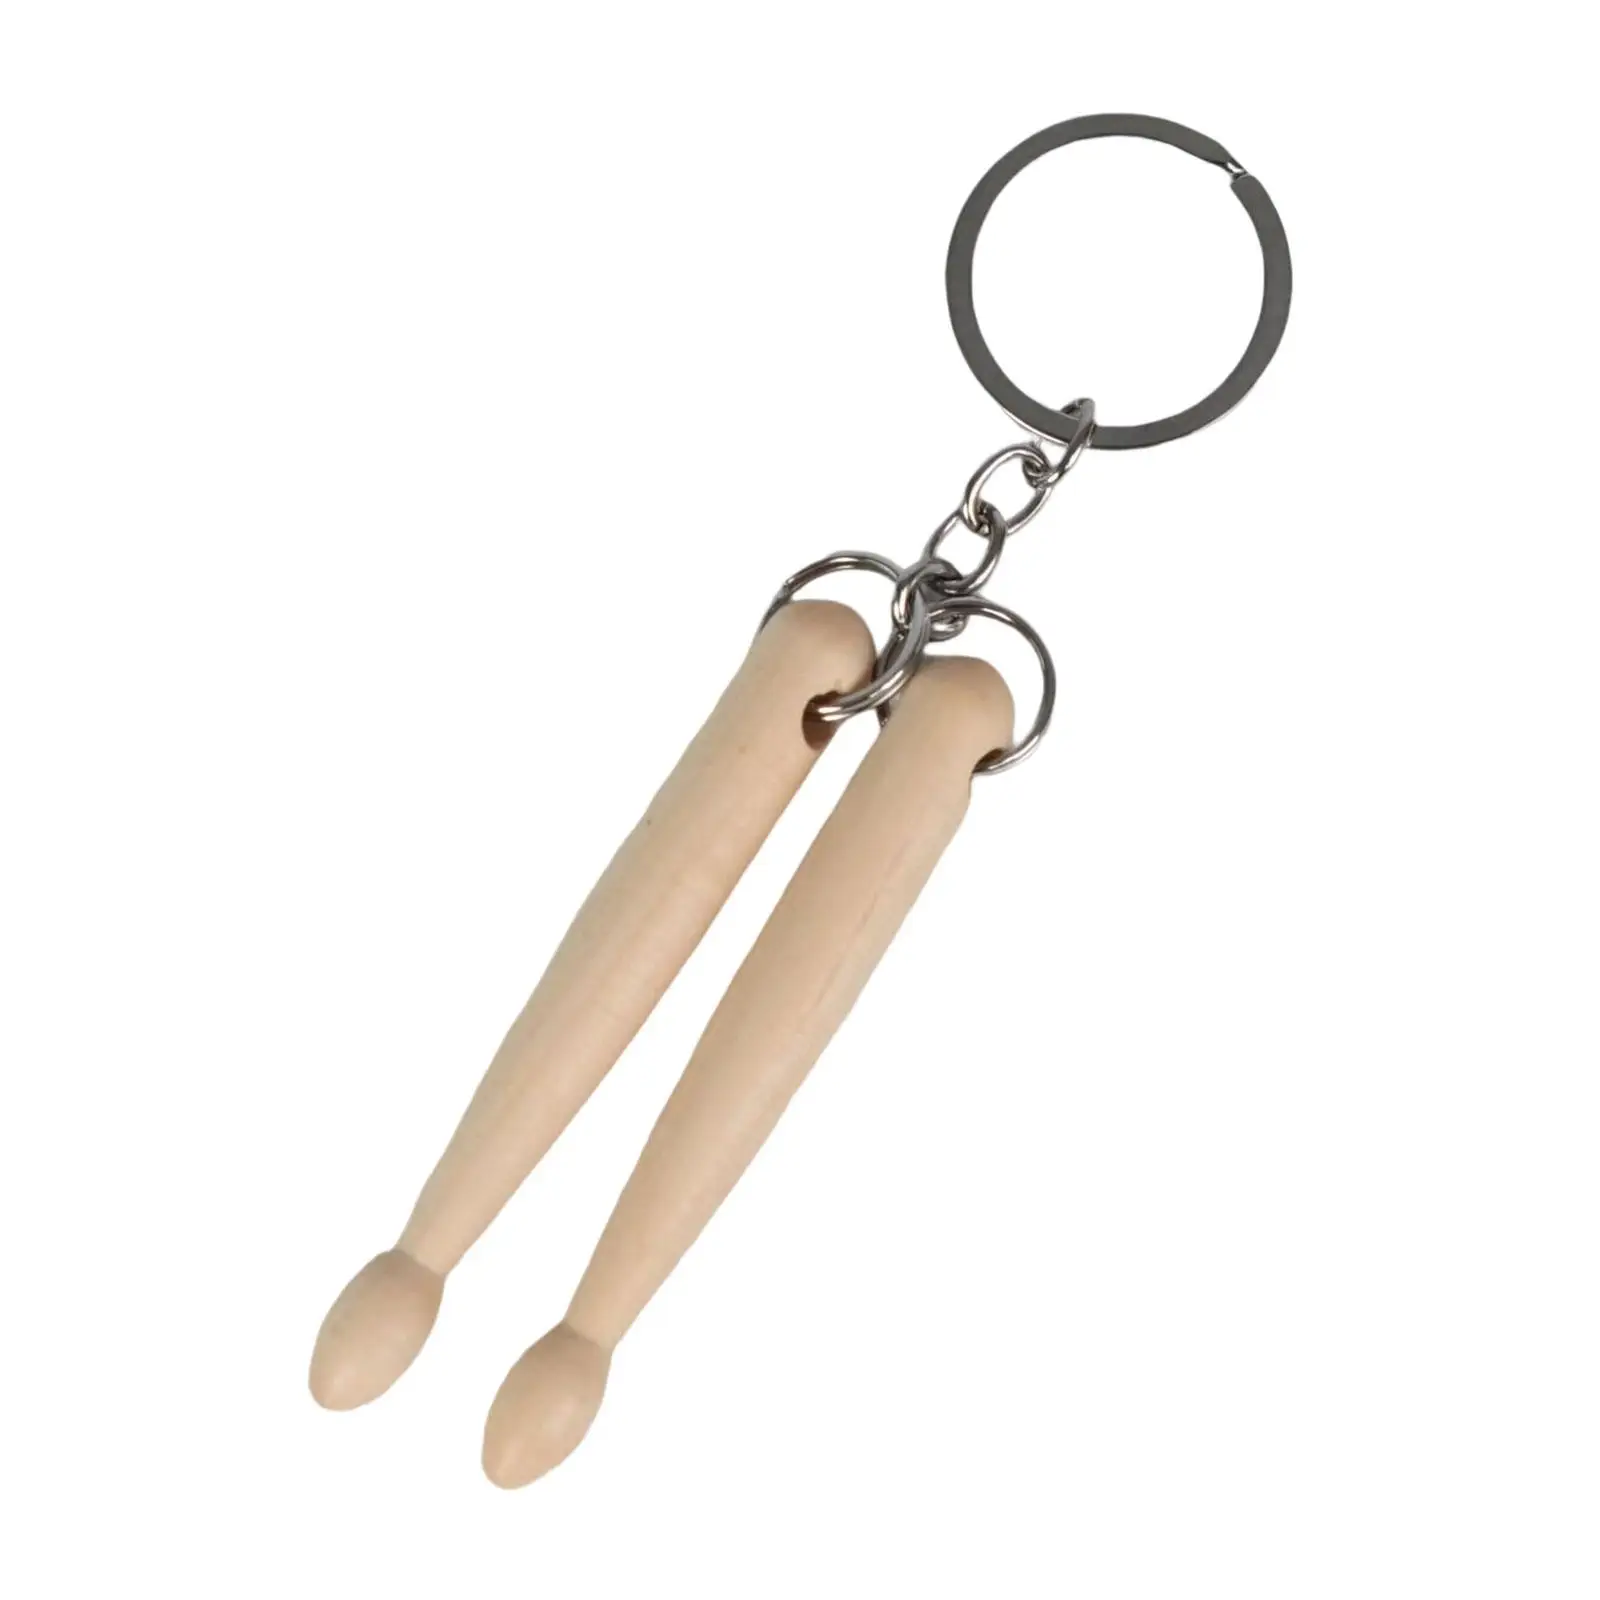 Portable Drumstick Keychain Wood Keychain Gadget Musical Instrument Toys Wood Drumsticks Percussion Keyring for mother Day Gift